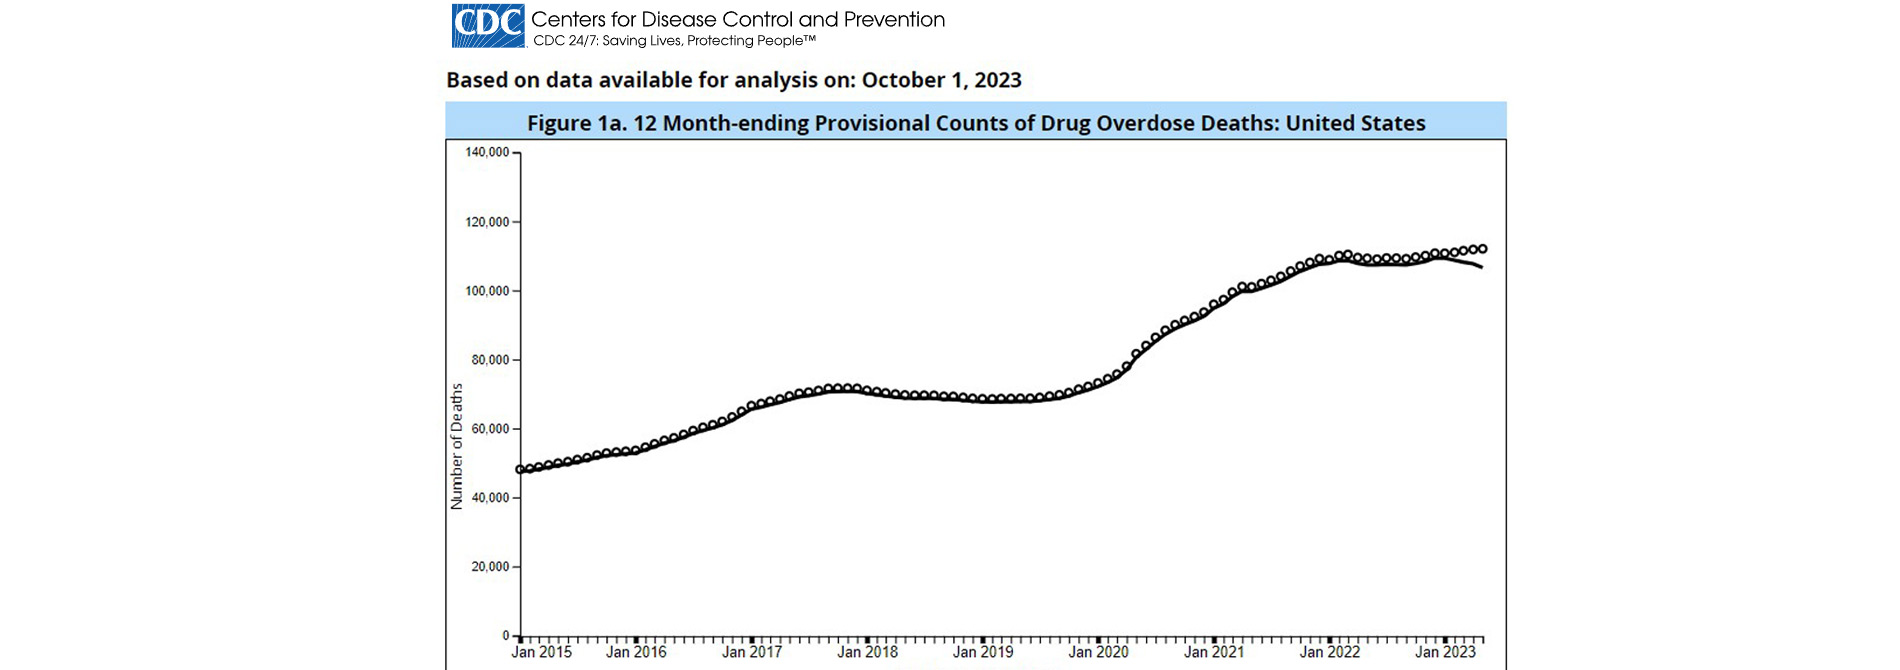 12 Month-ending Provisional Counts of Drug Overdose Deaths: United States